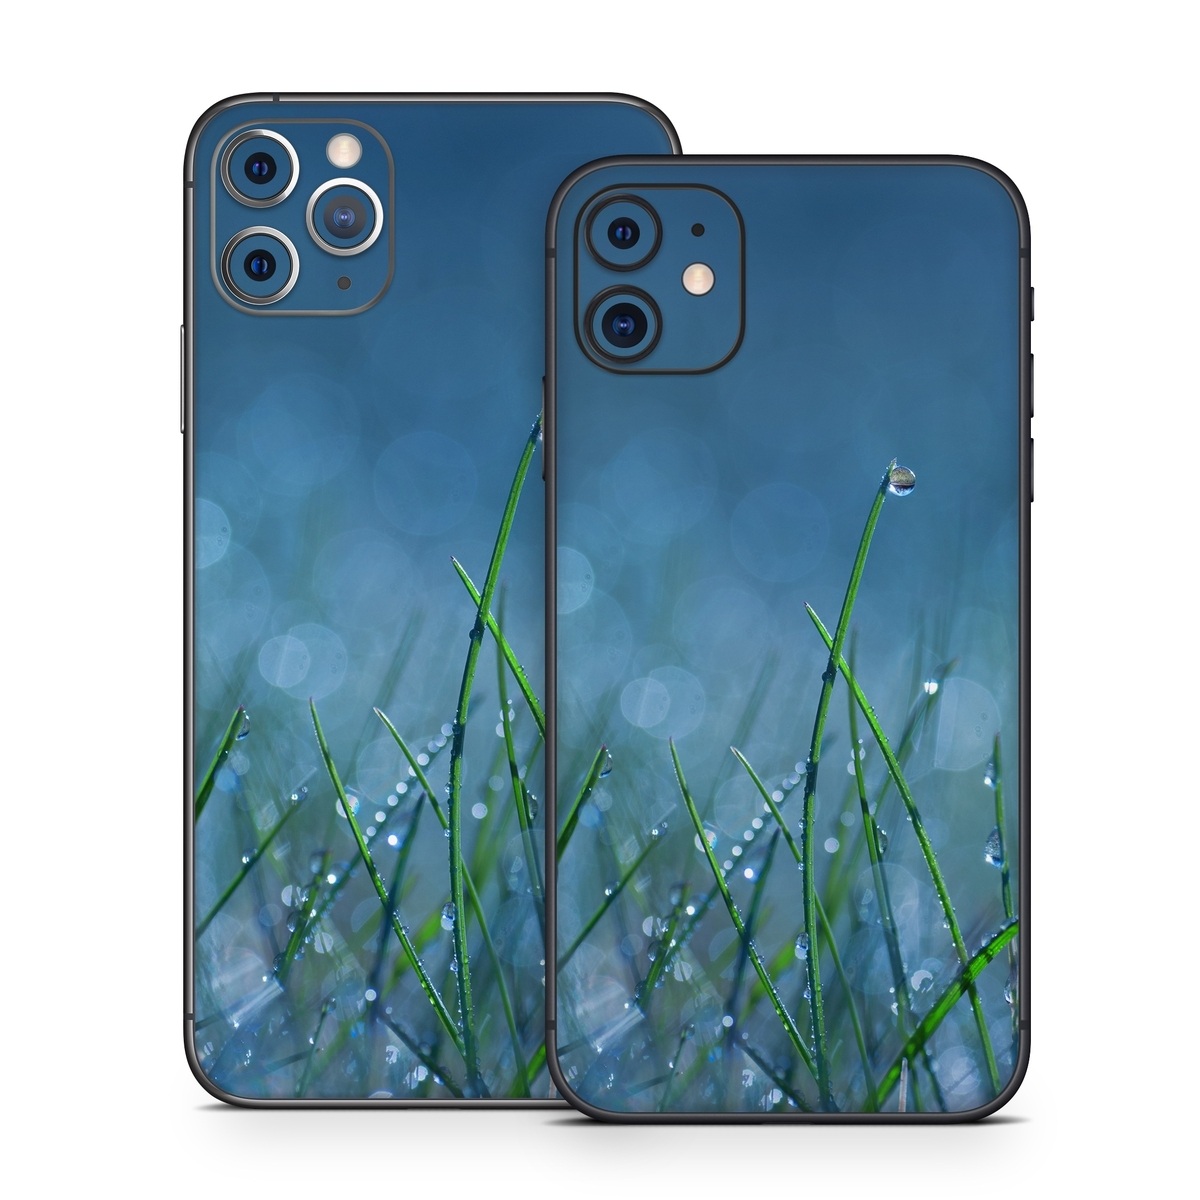 iPhone 11 Skin design of Moisture, Dew, Water, Green, Grass, Plant, Drop, Grass family, Macro photography, Close-up with blue, black, green, gray colors